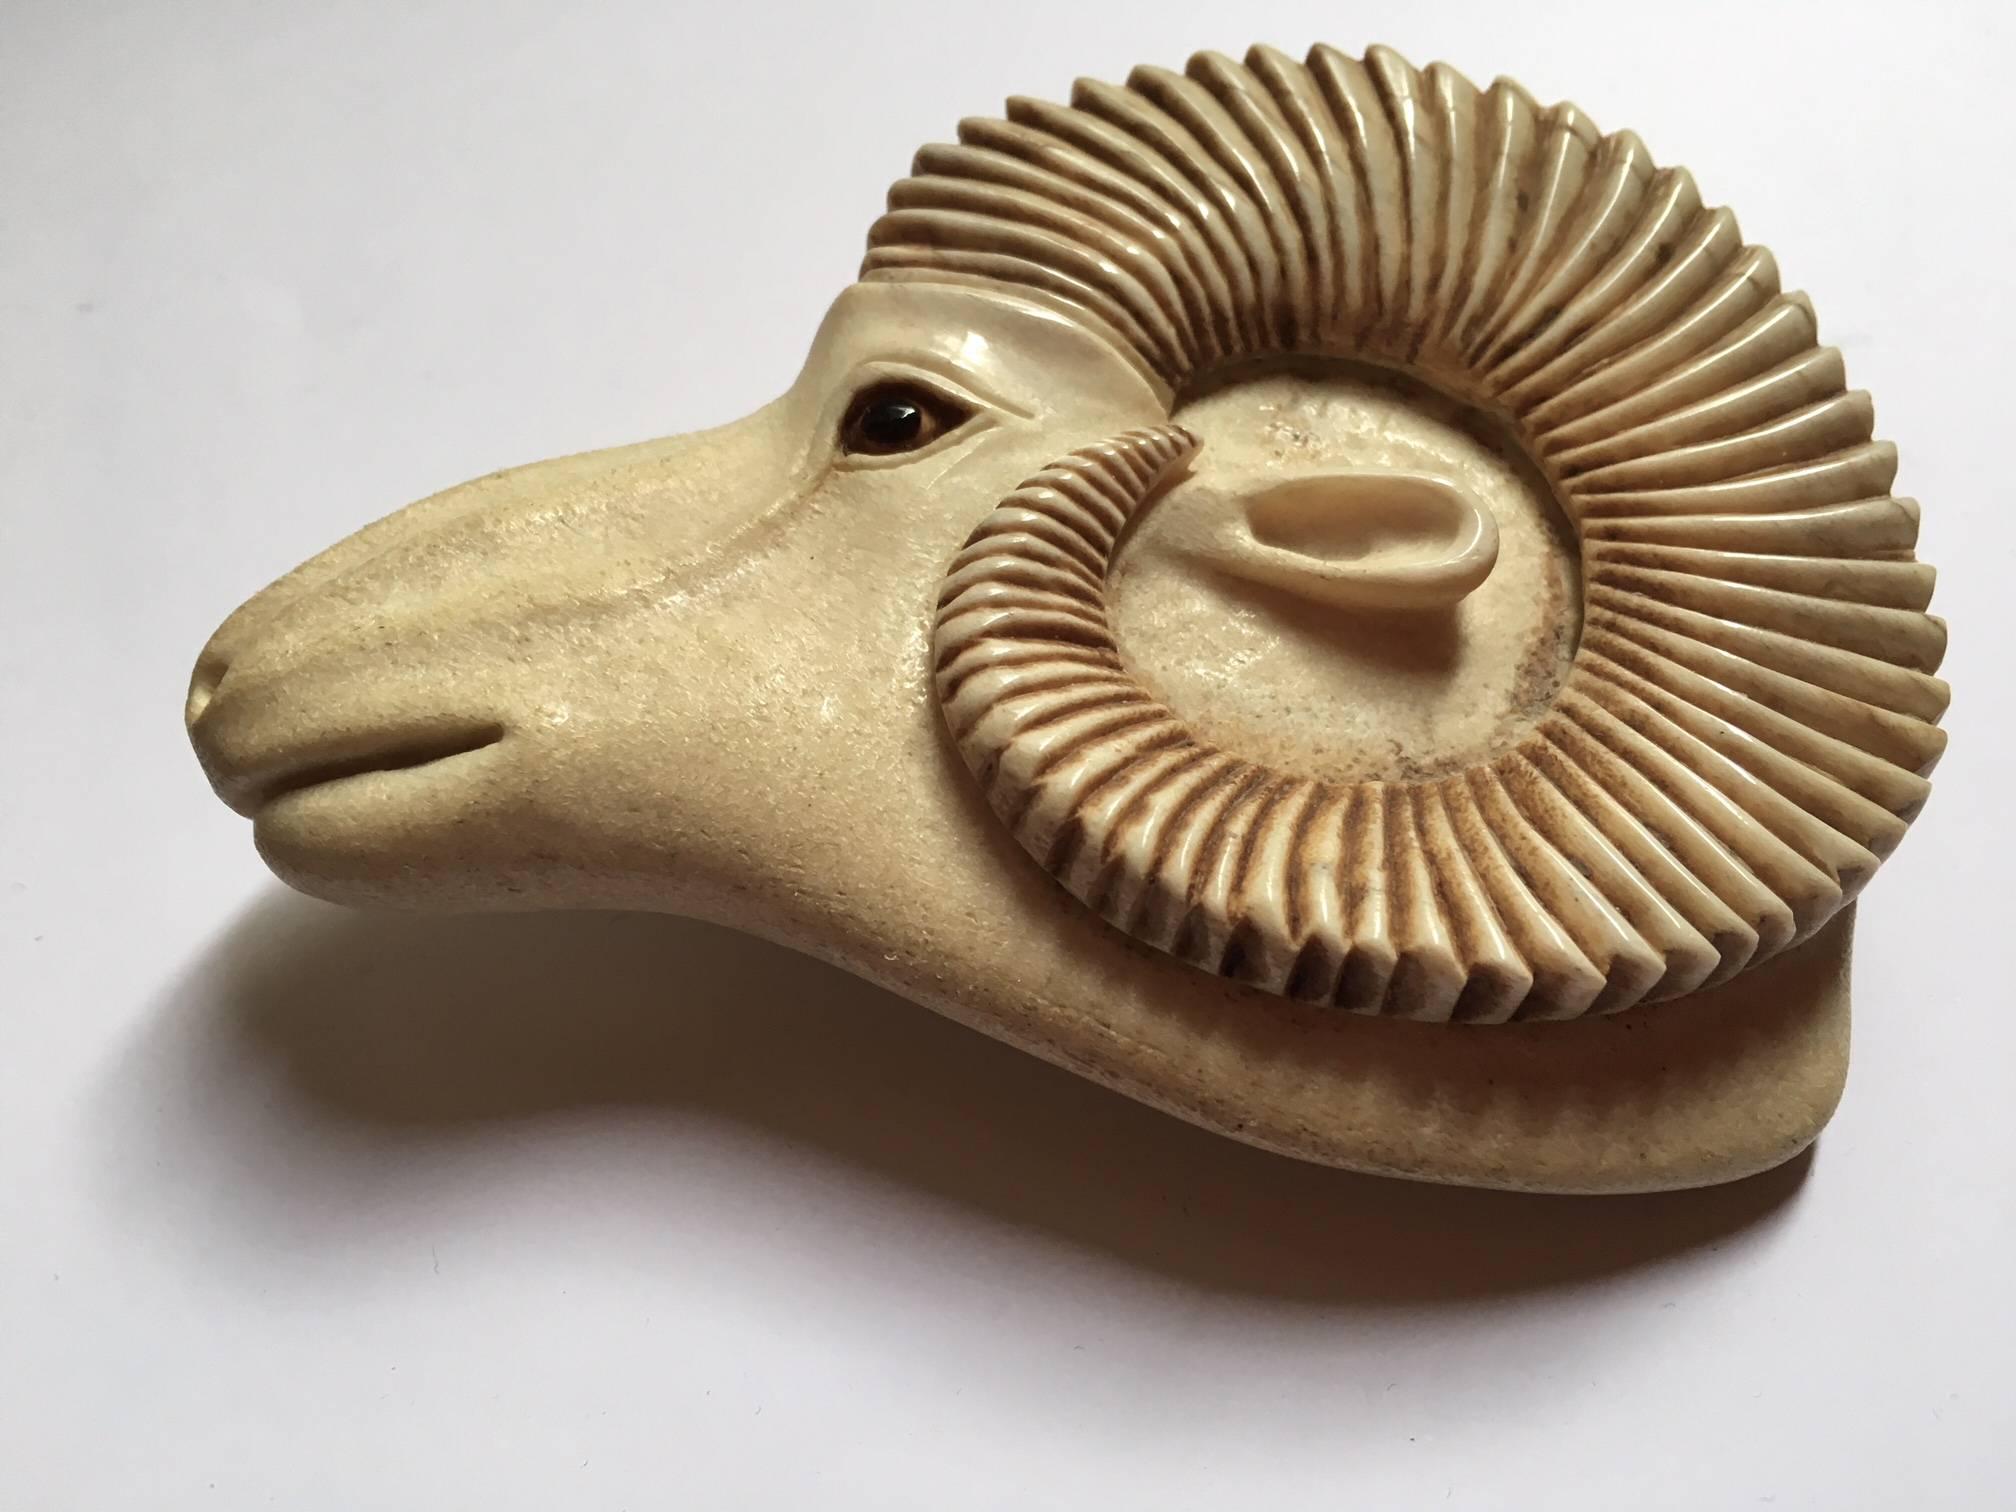 A Stan Hill, (1921-2003), fine carving of a mountain ram by Stan Hill,(1921-2003), Canadian artist based on the Conne River Reserve. His work is included in a number of public and private collection. Served as the chair of Aboriginal Artists of